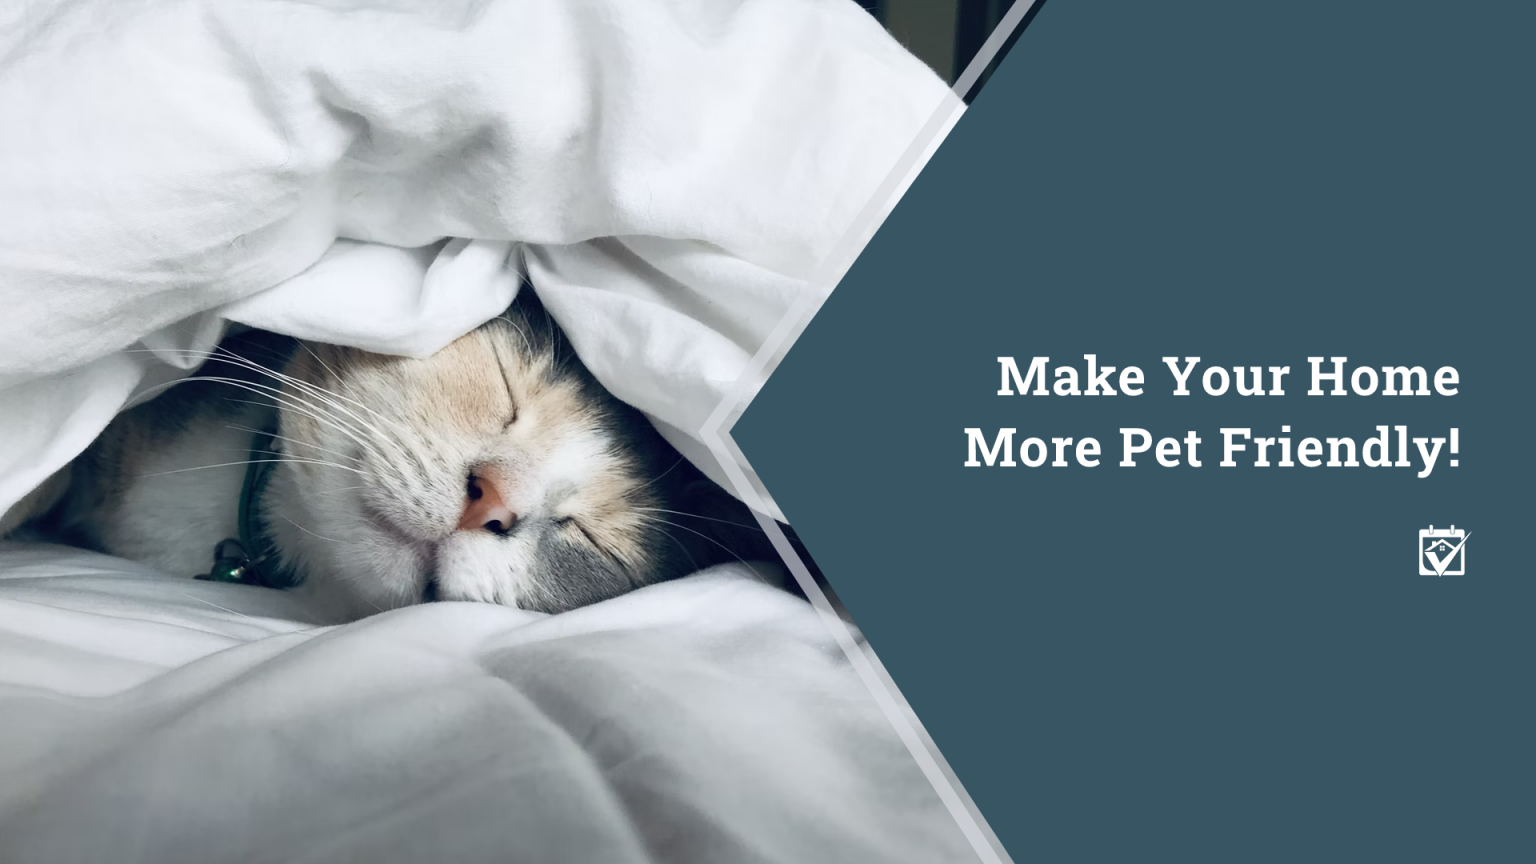 Make Your Home More Pet Friendly